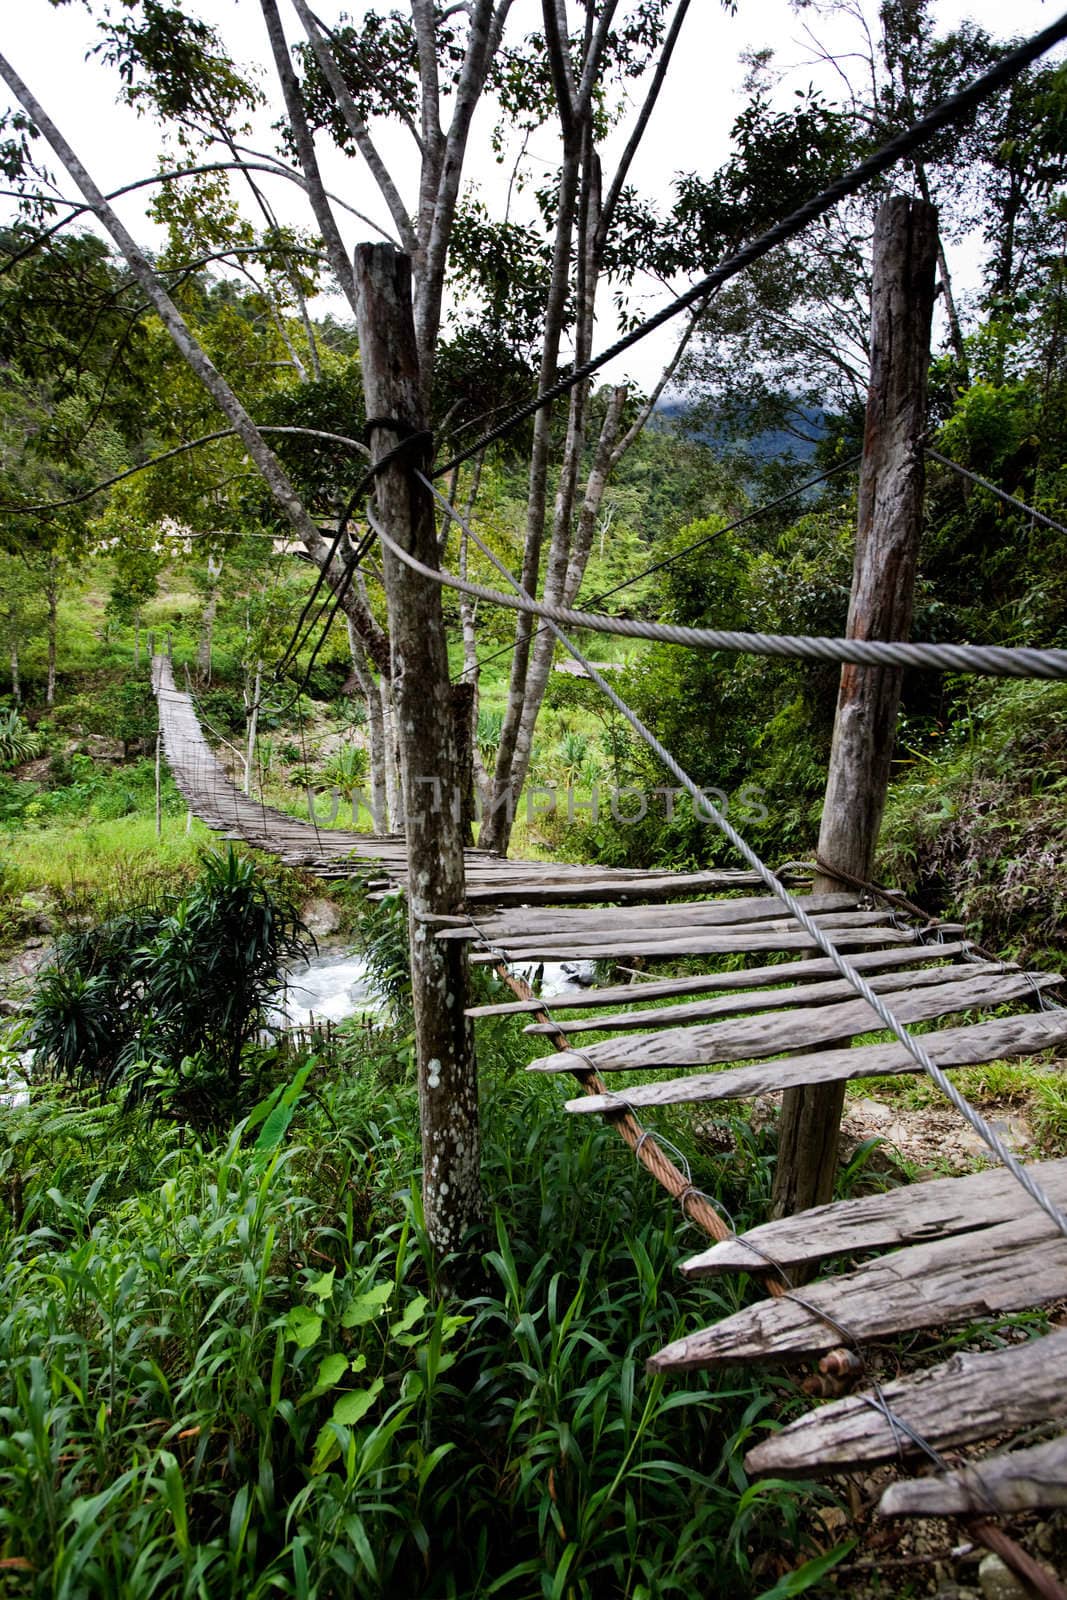 An old hanging bridge over a river